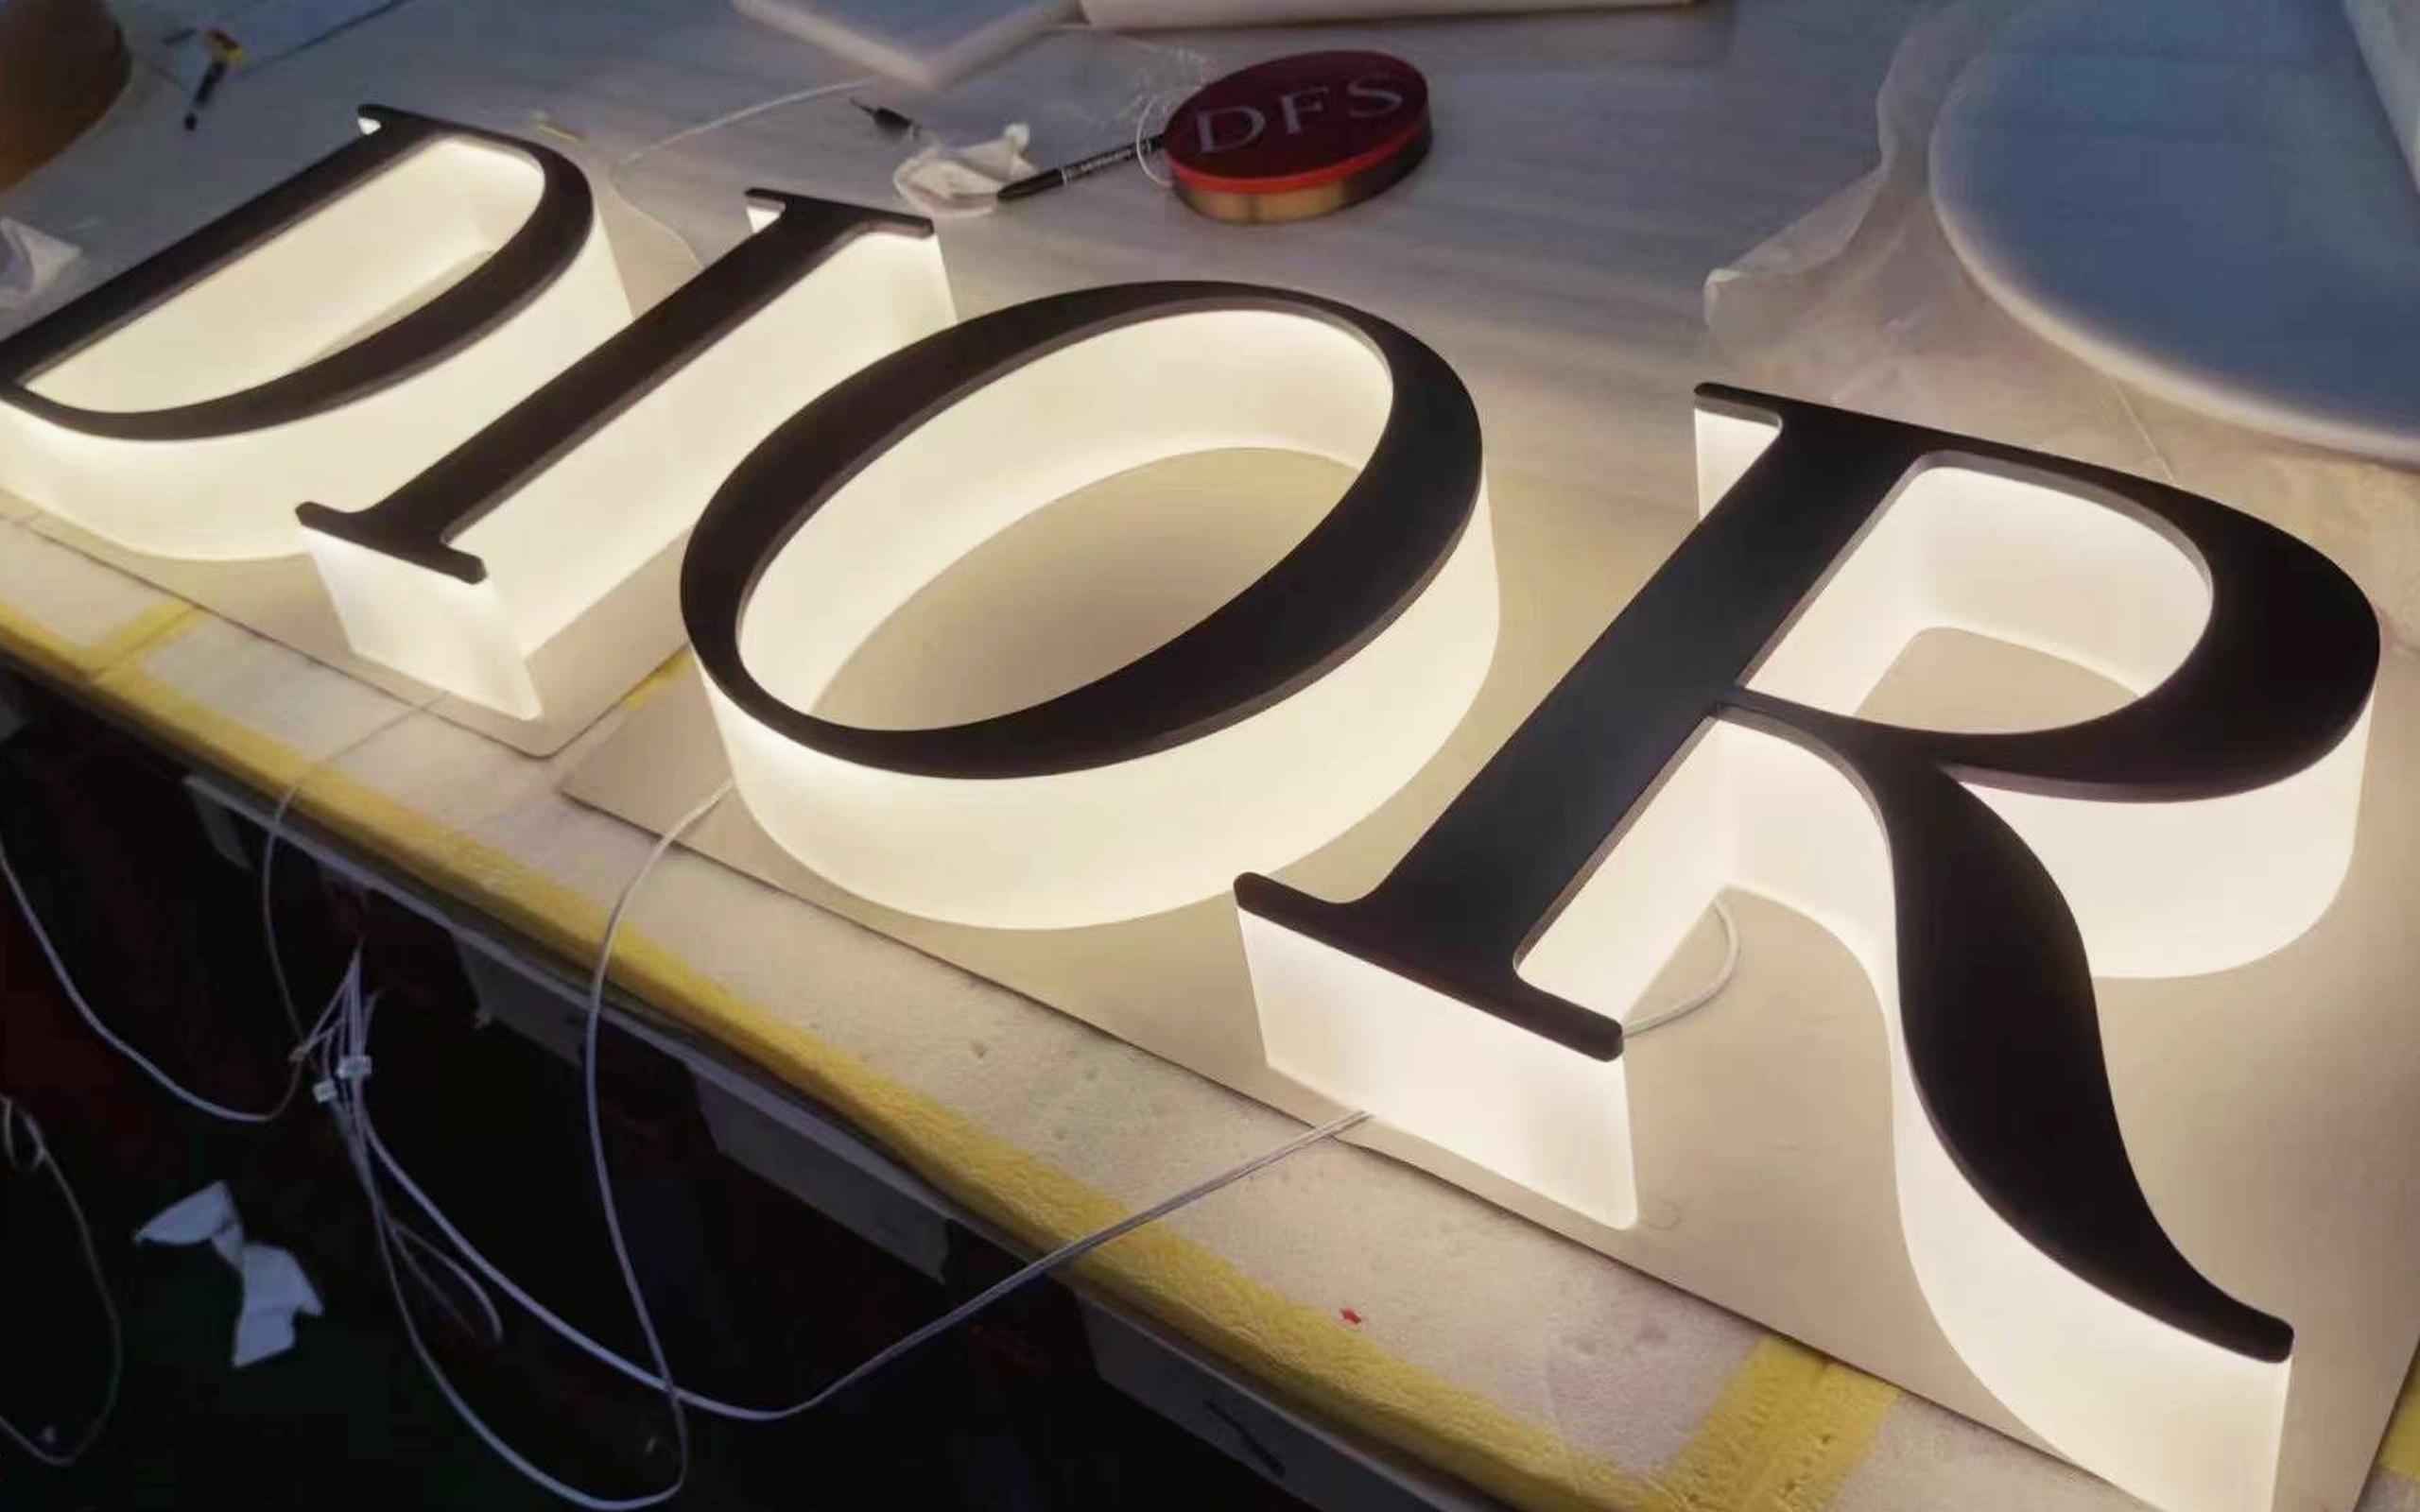 Dior letters with an extreme thick acrylic backing illuminated sign